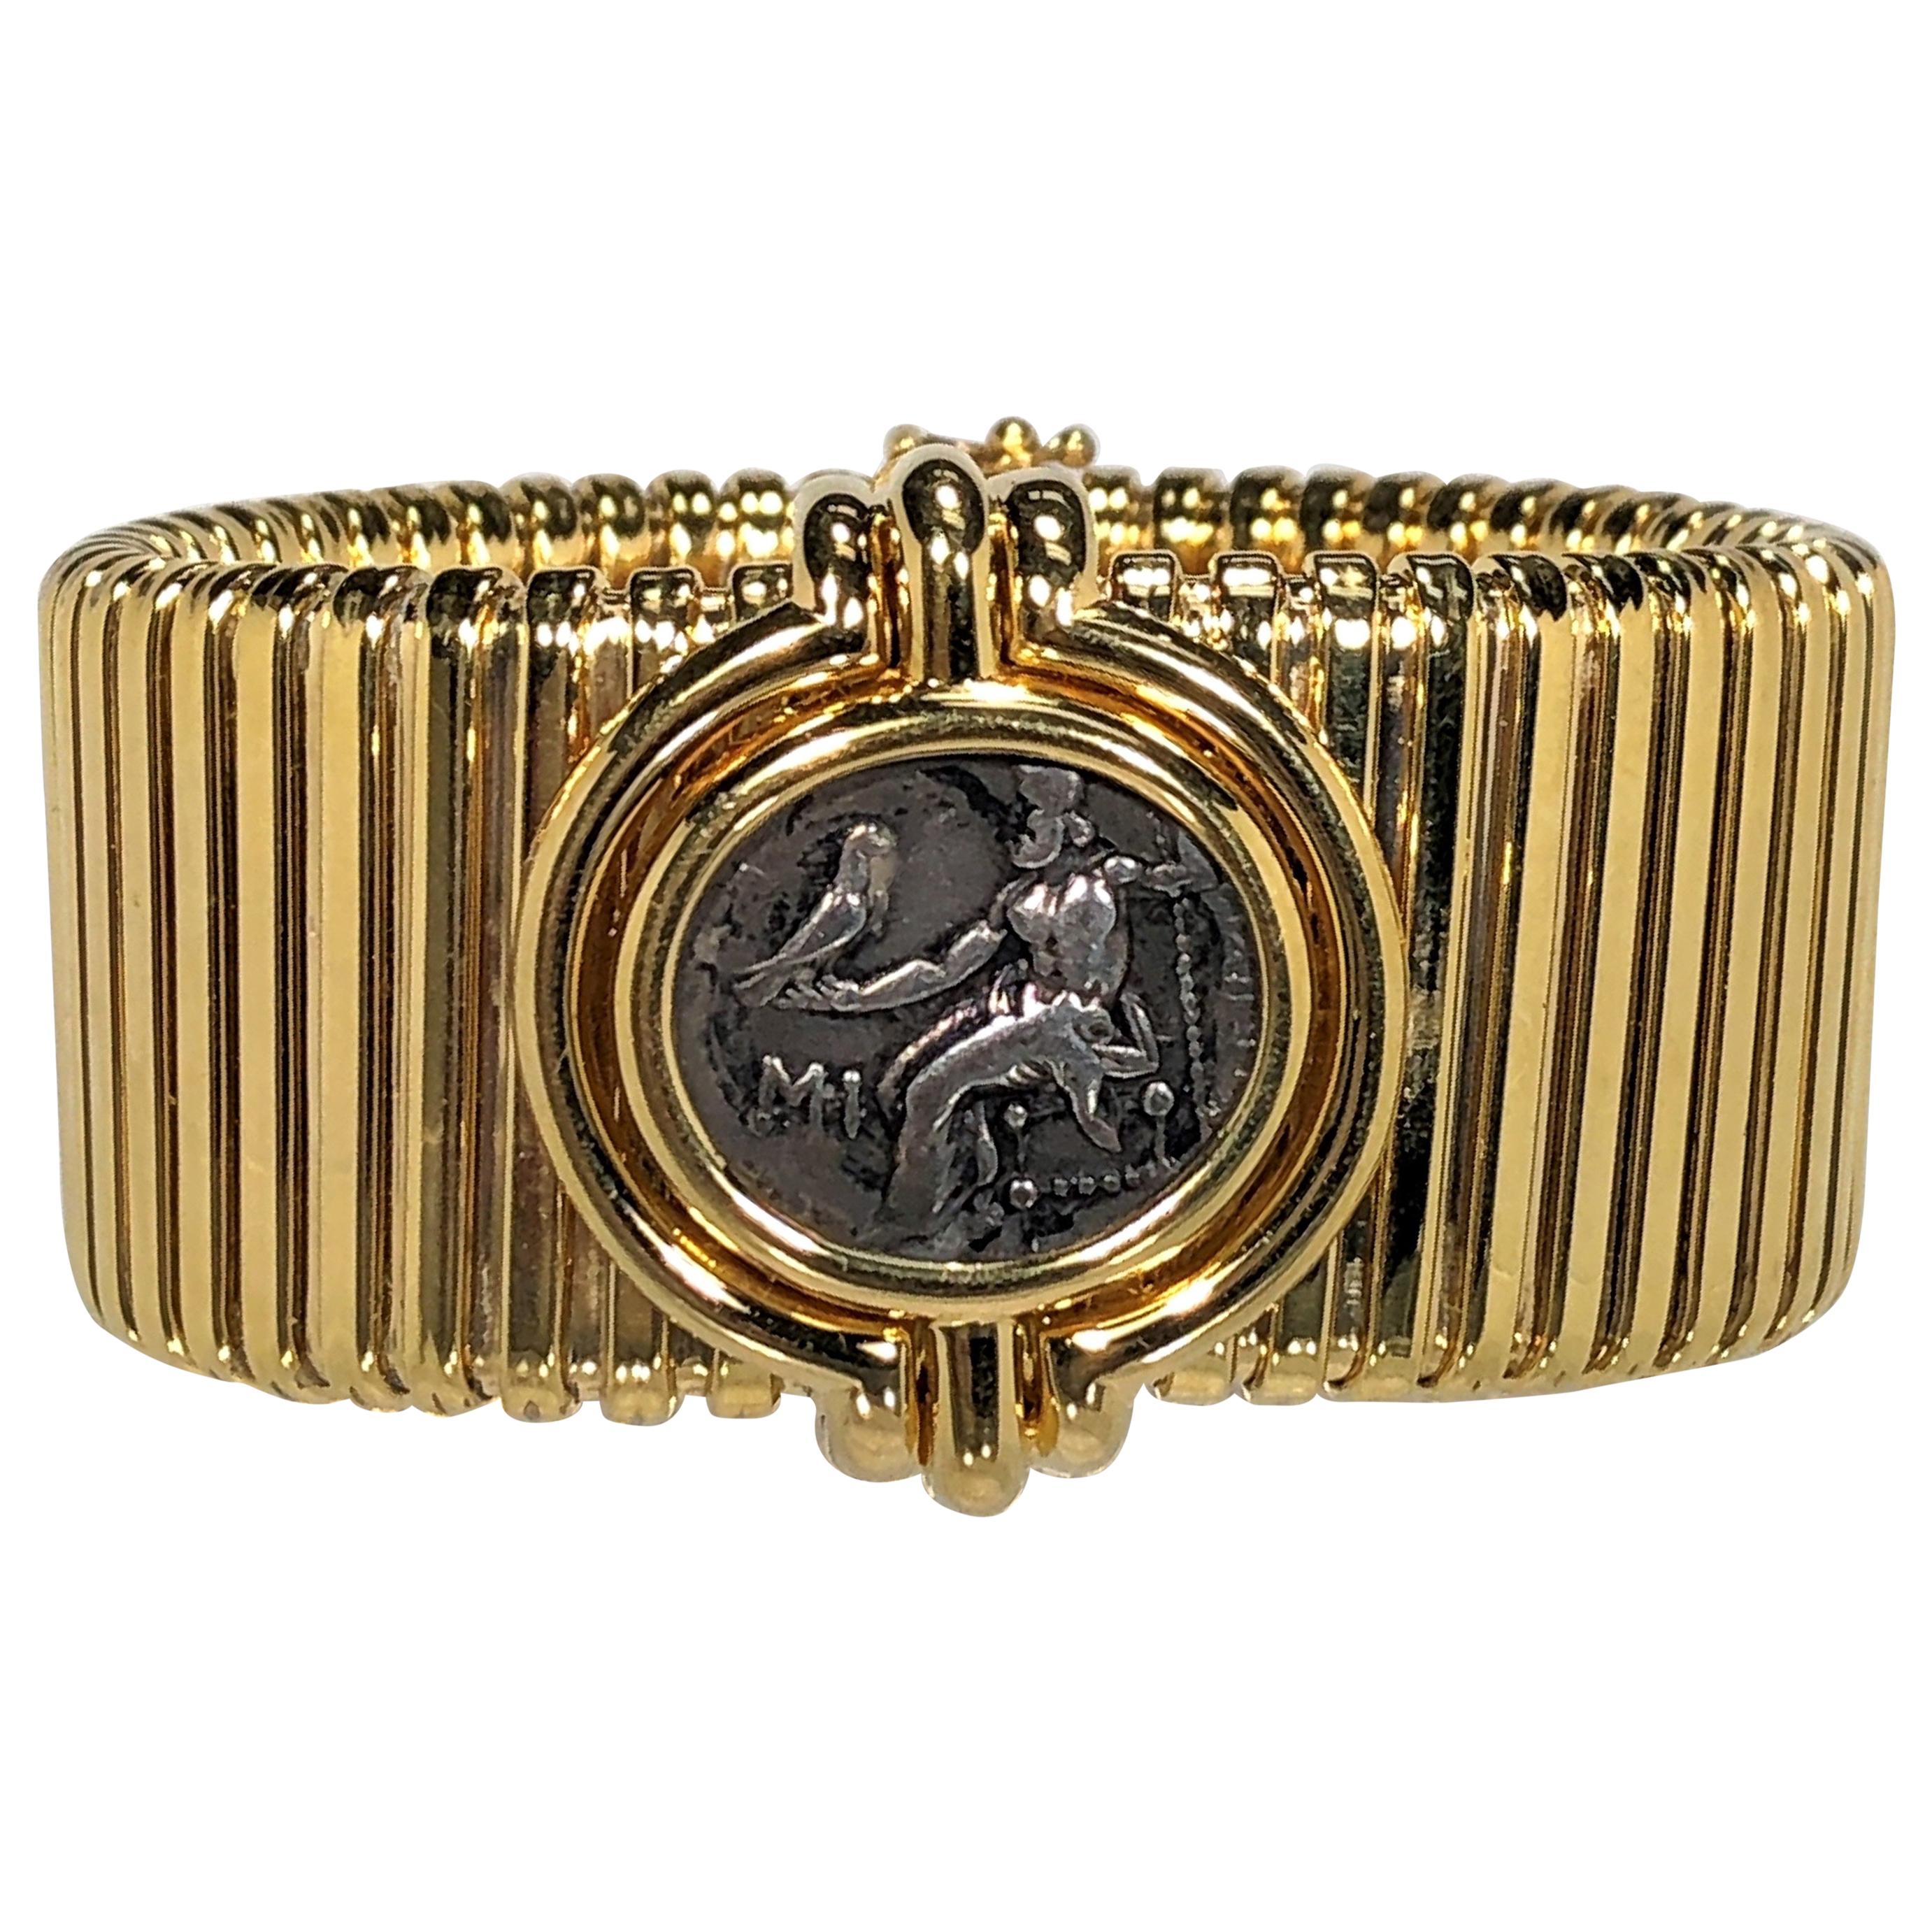 Tubogas Gold Cuff Bracelet with Filippo III Ancient Coin Center